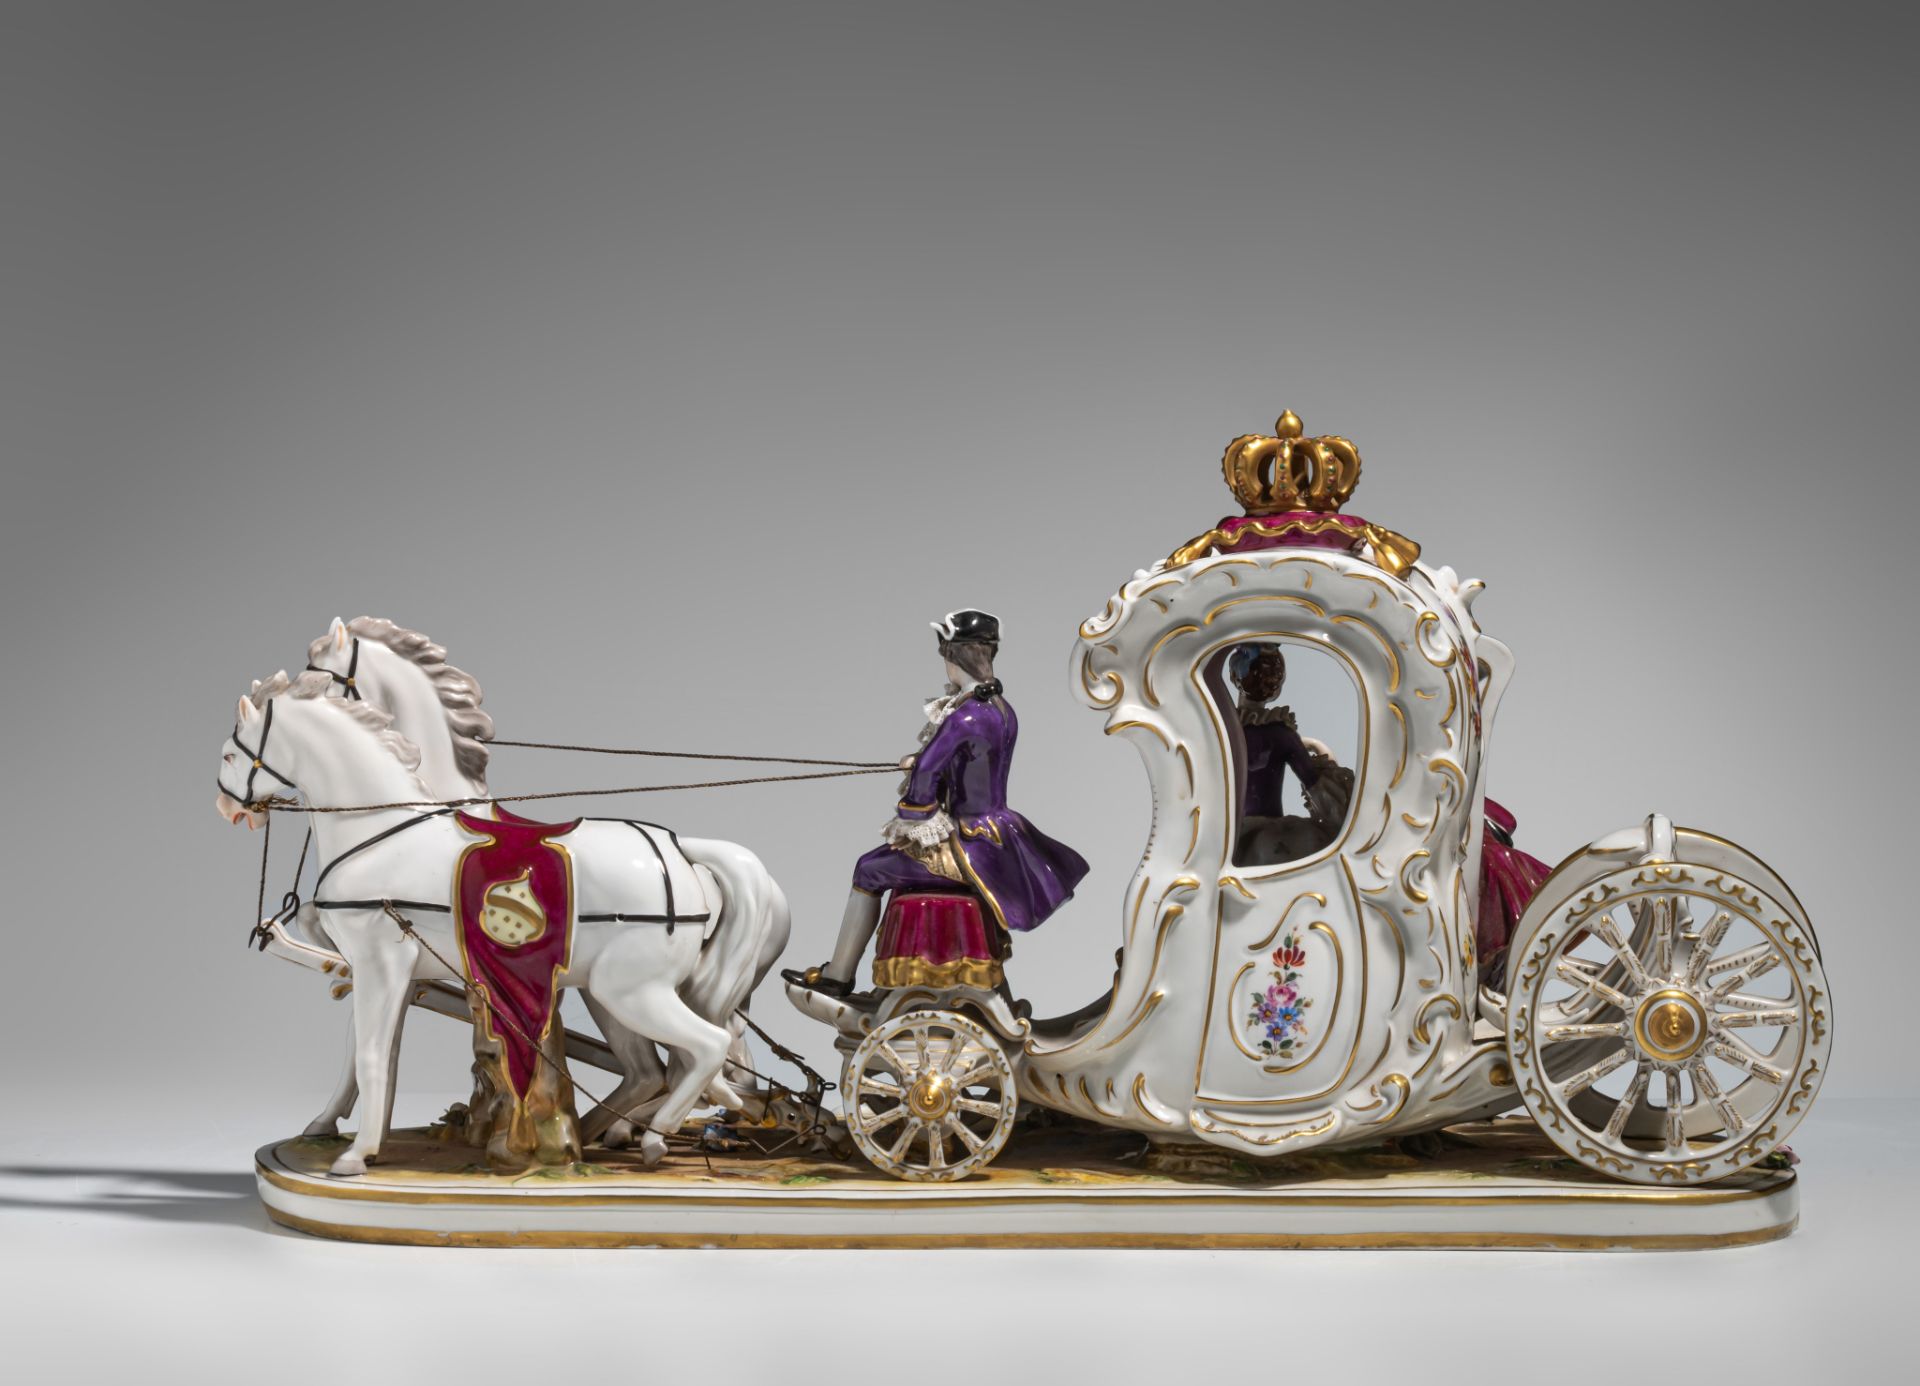 A Saxony porcelain group of a chariot in abundant Rococo style, H 29 - W 57 cm - Image 3 of 9